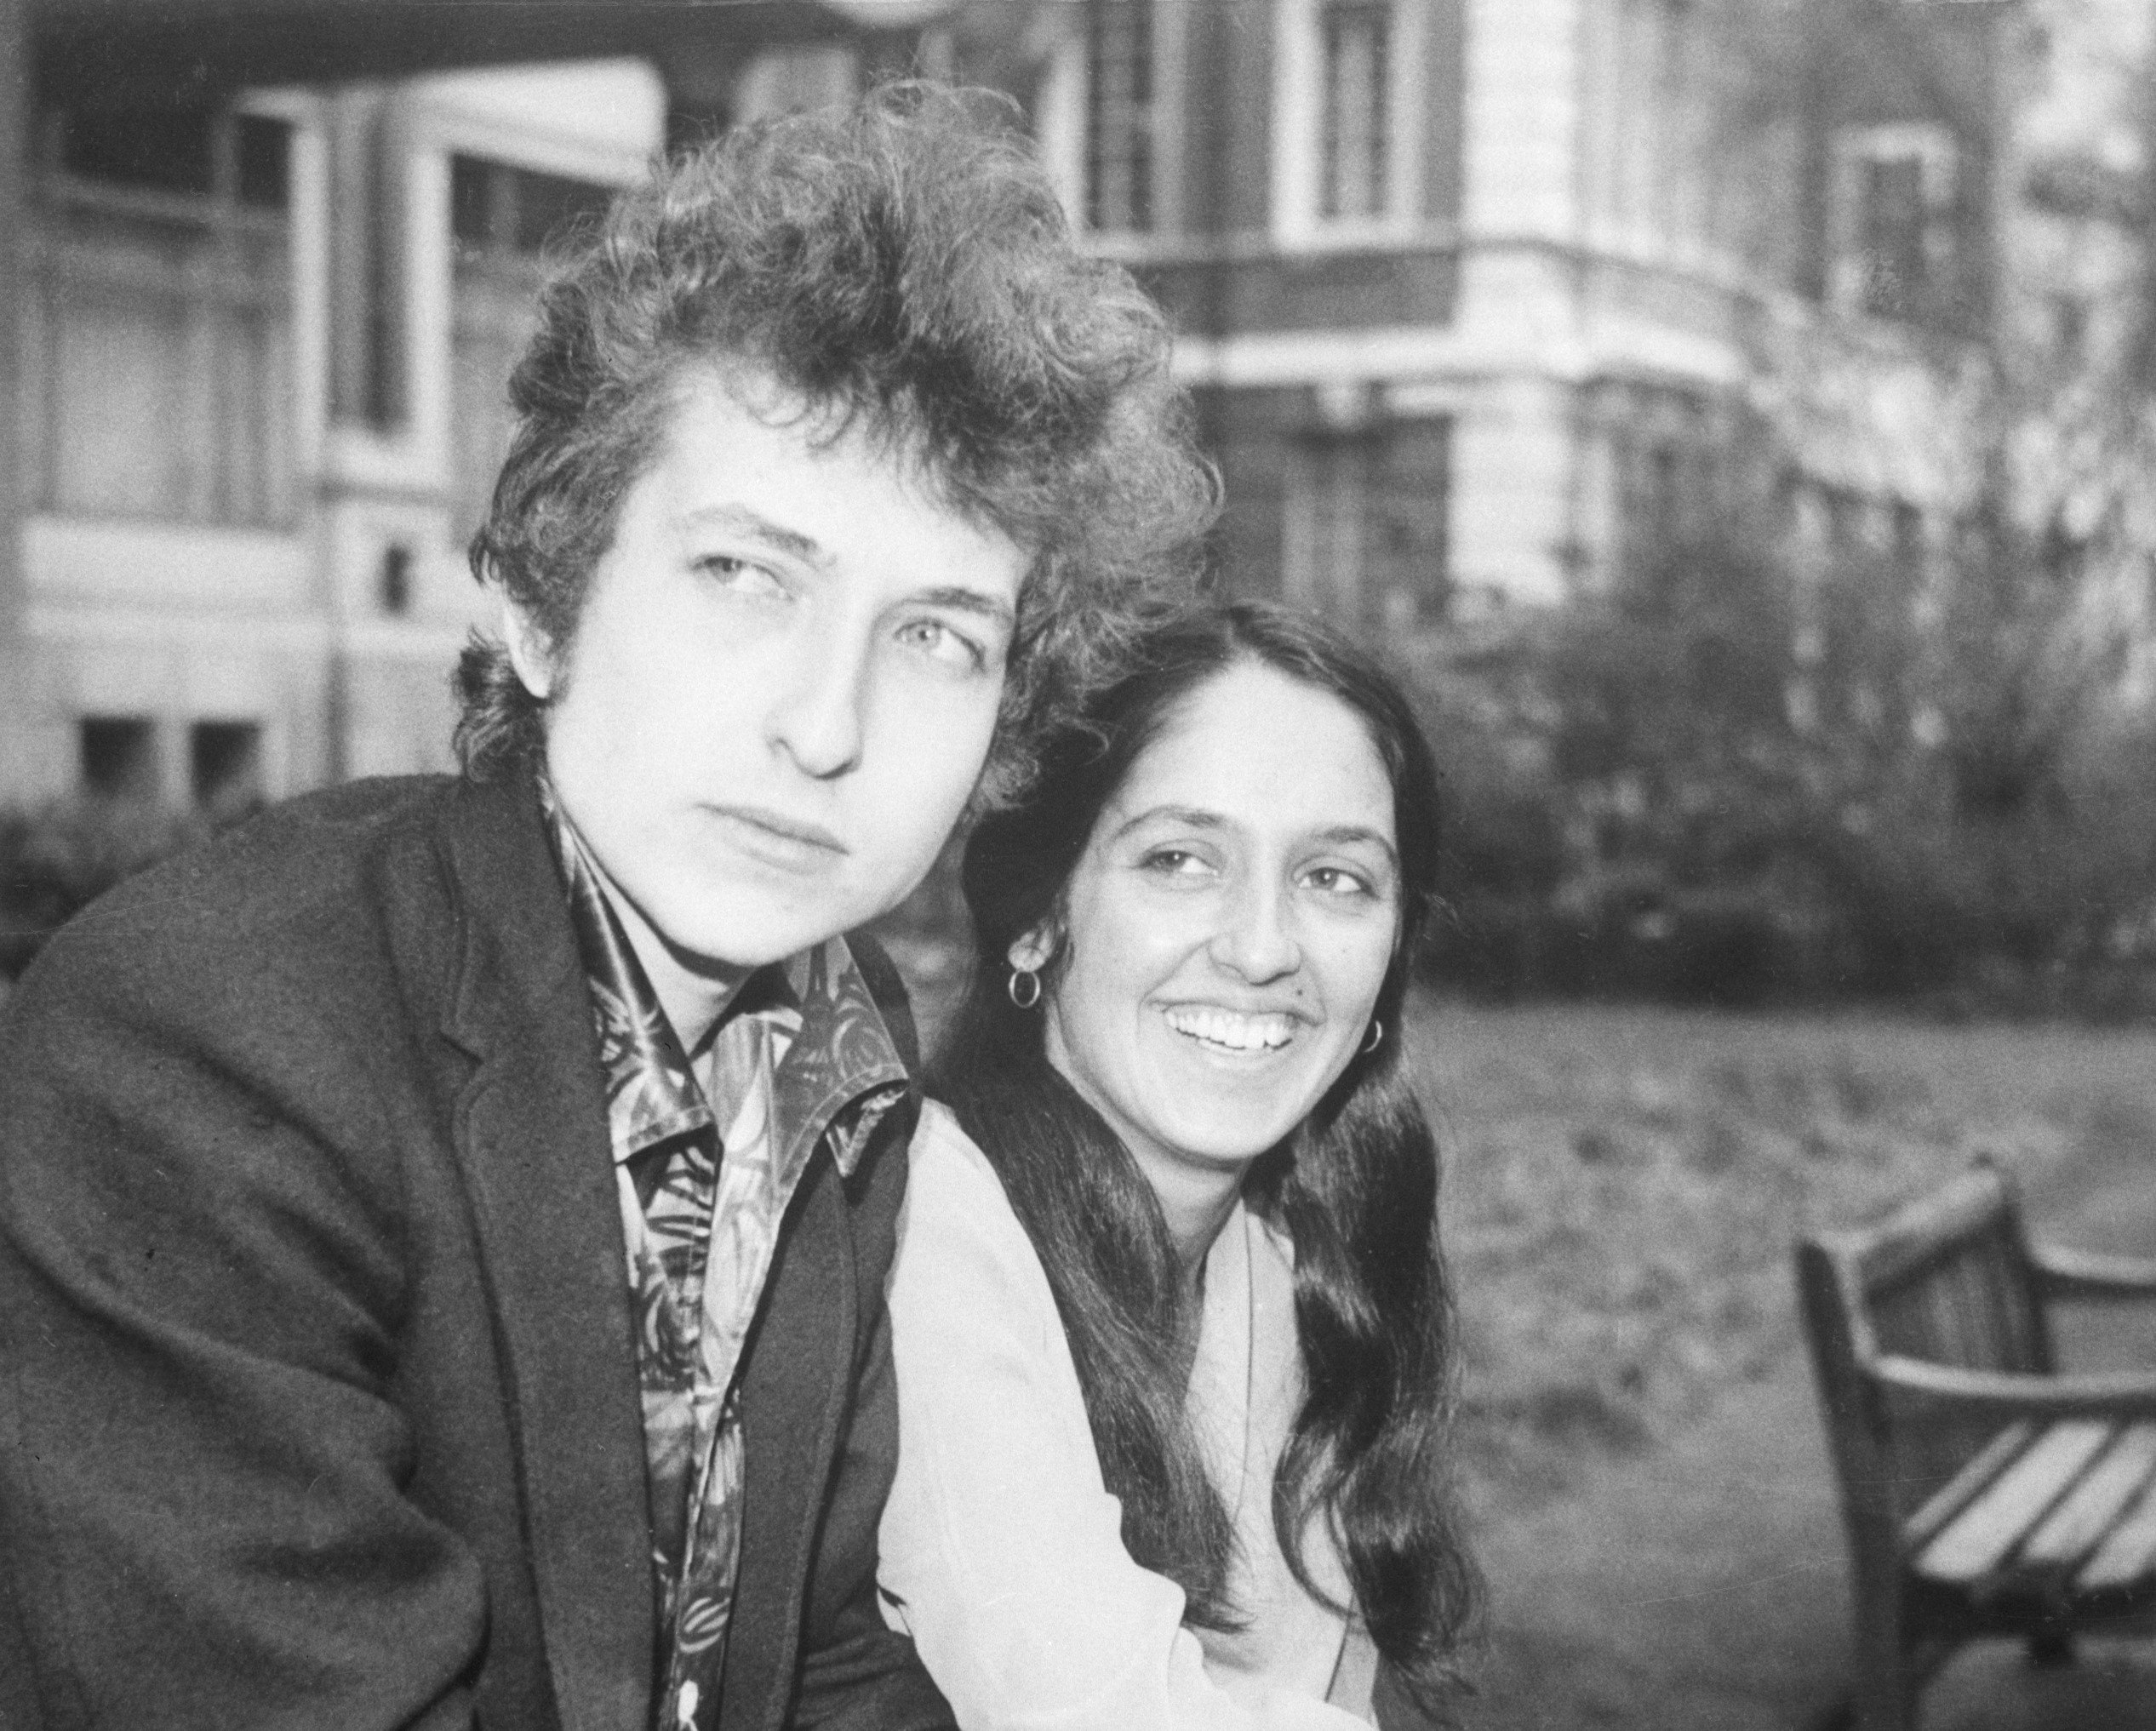 A black and white picture of Bob Dylan and Joan Baez sitting on a bench together outdoors. 